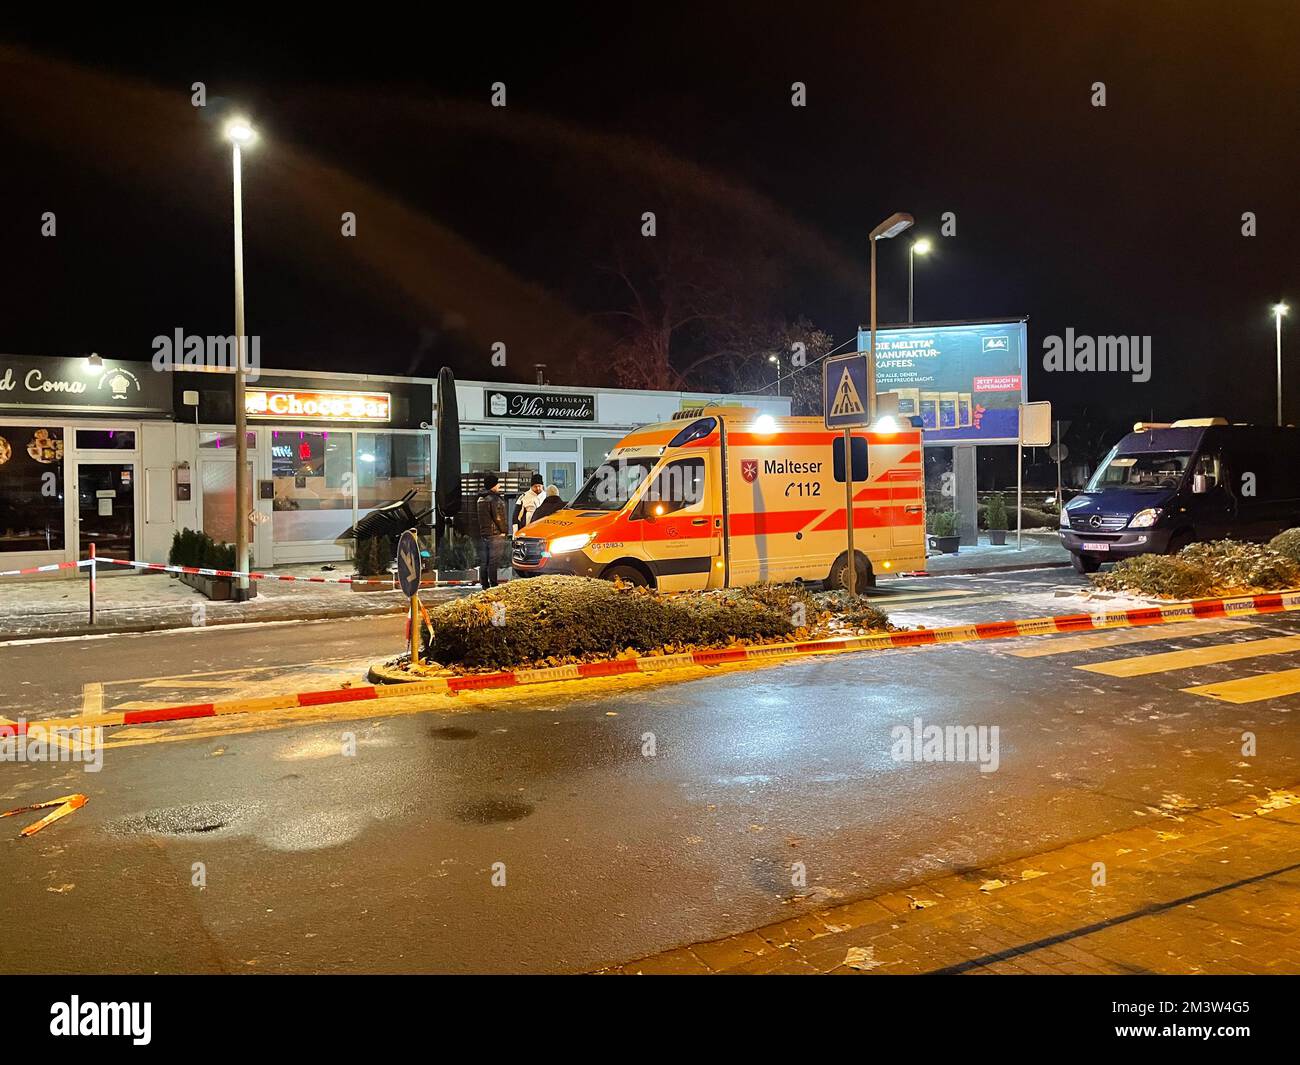 16 December 2022, Hessen, Flörsheim: Rescue workers are on duty at a crime scene. Presumably in a quarrel, a man inflicted fatal stab wounds on another on Friday evening. The two had clashed in a building in Flörsheim am Main (Main-Taunus district), which houses a bar, a kiosk and restaurant snacks. The victim suffered stab wounds to the upper body, to which he succumbed at the scene, according to police on Saturday night. The alleged perpetrator could be arrested after a short manhunt. More details about the circumstances of the crime and the participants could not give the police initially. Stock Photo